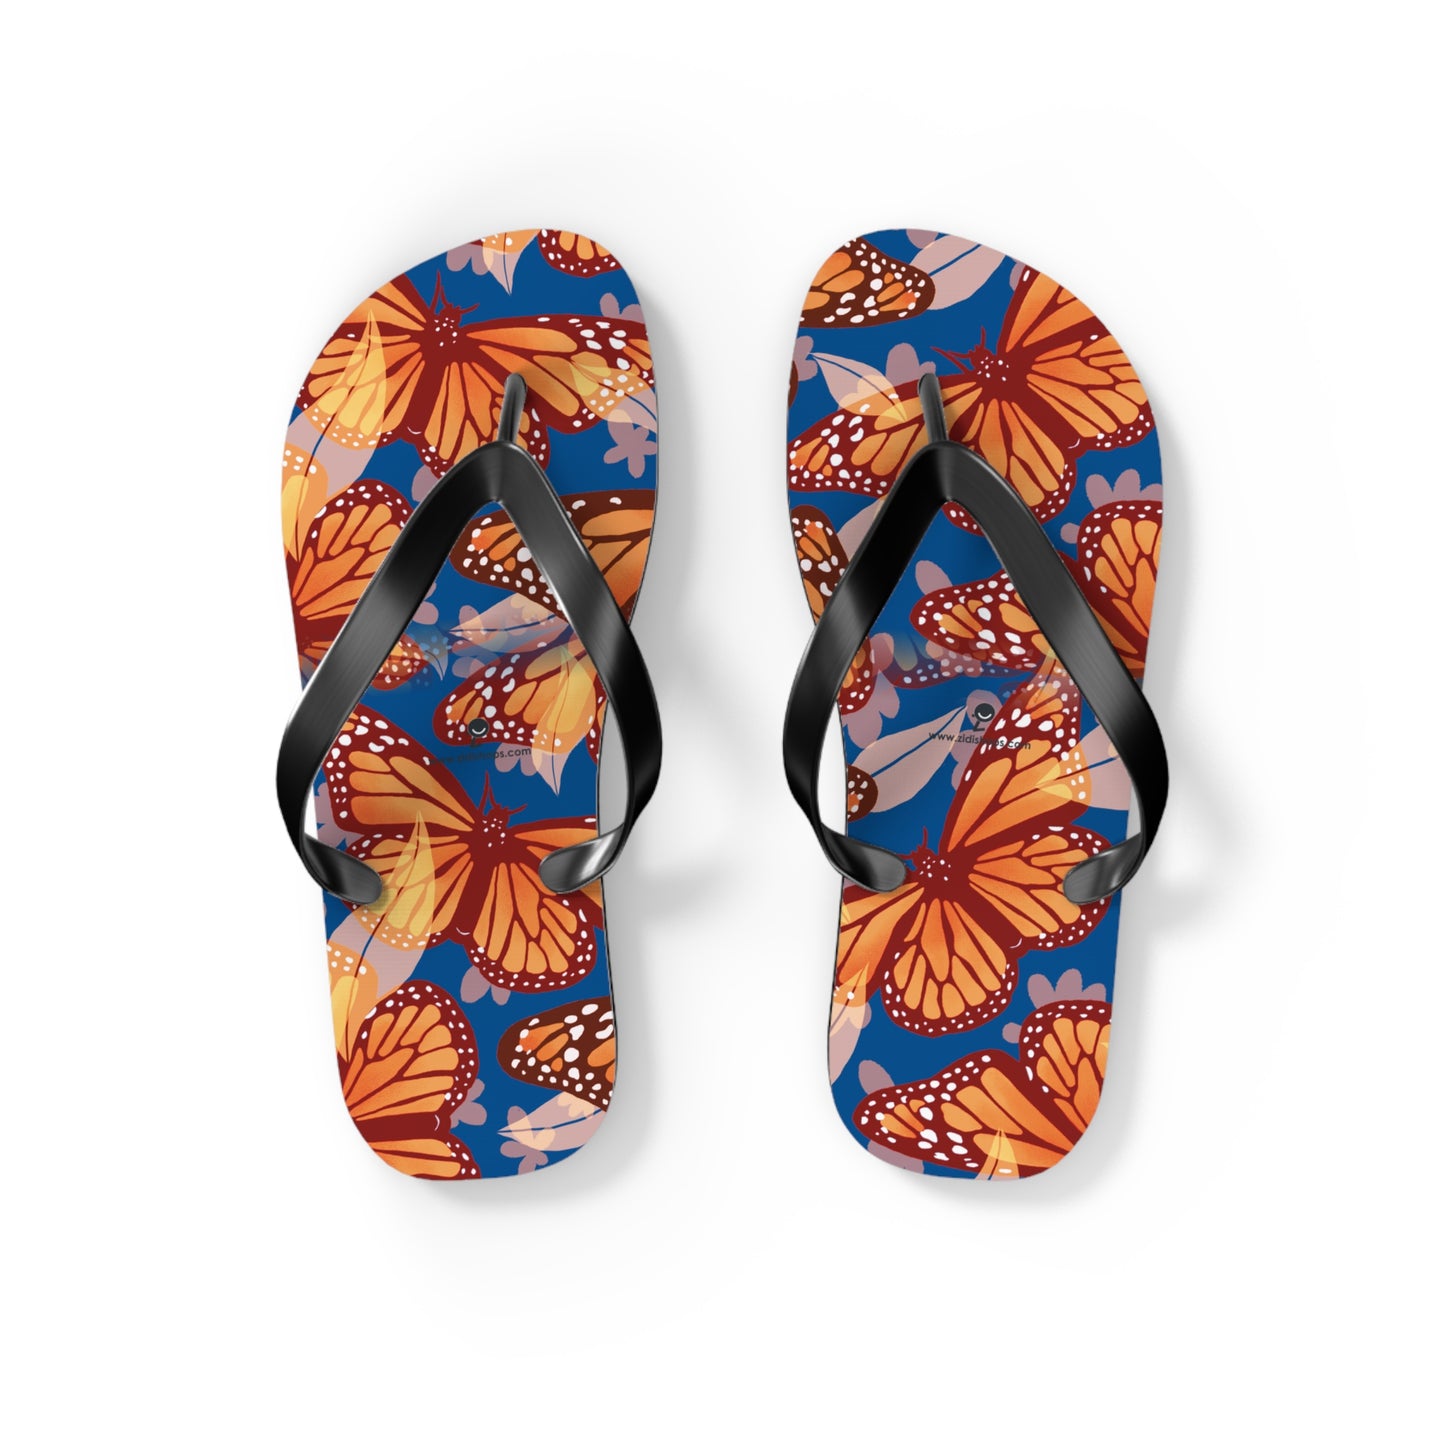 Flip Flops All-day comfort, Slippers, colorful, With an easy slip-on design, a cushioned footbed. Mixed colors butterfly